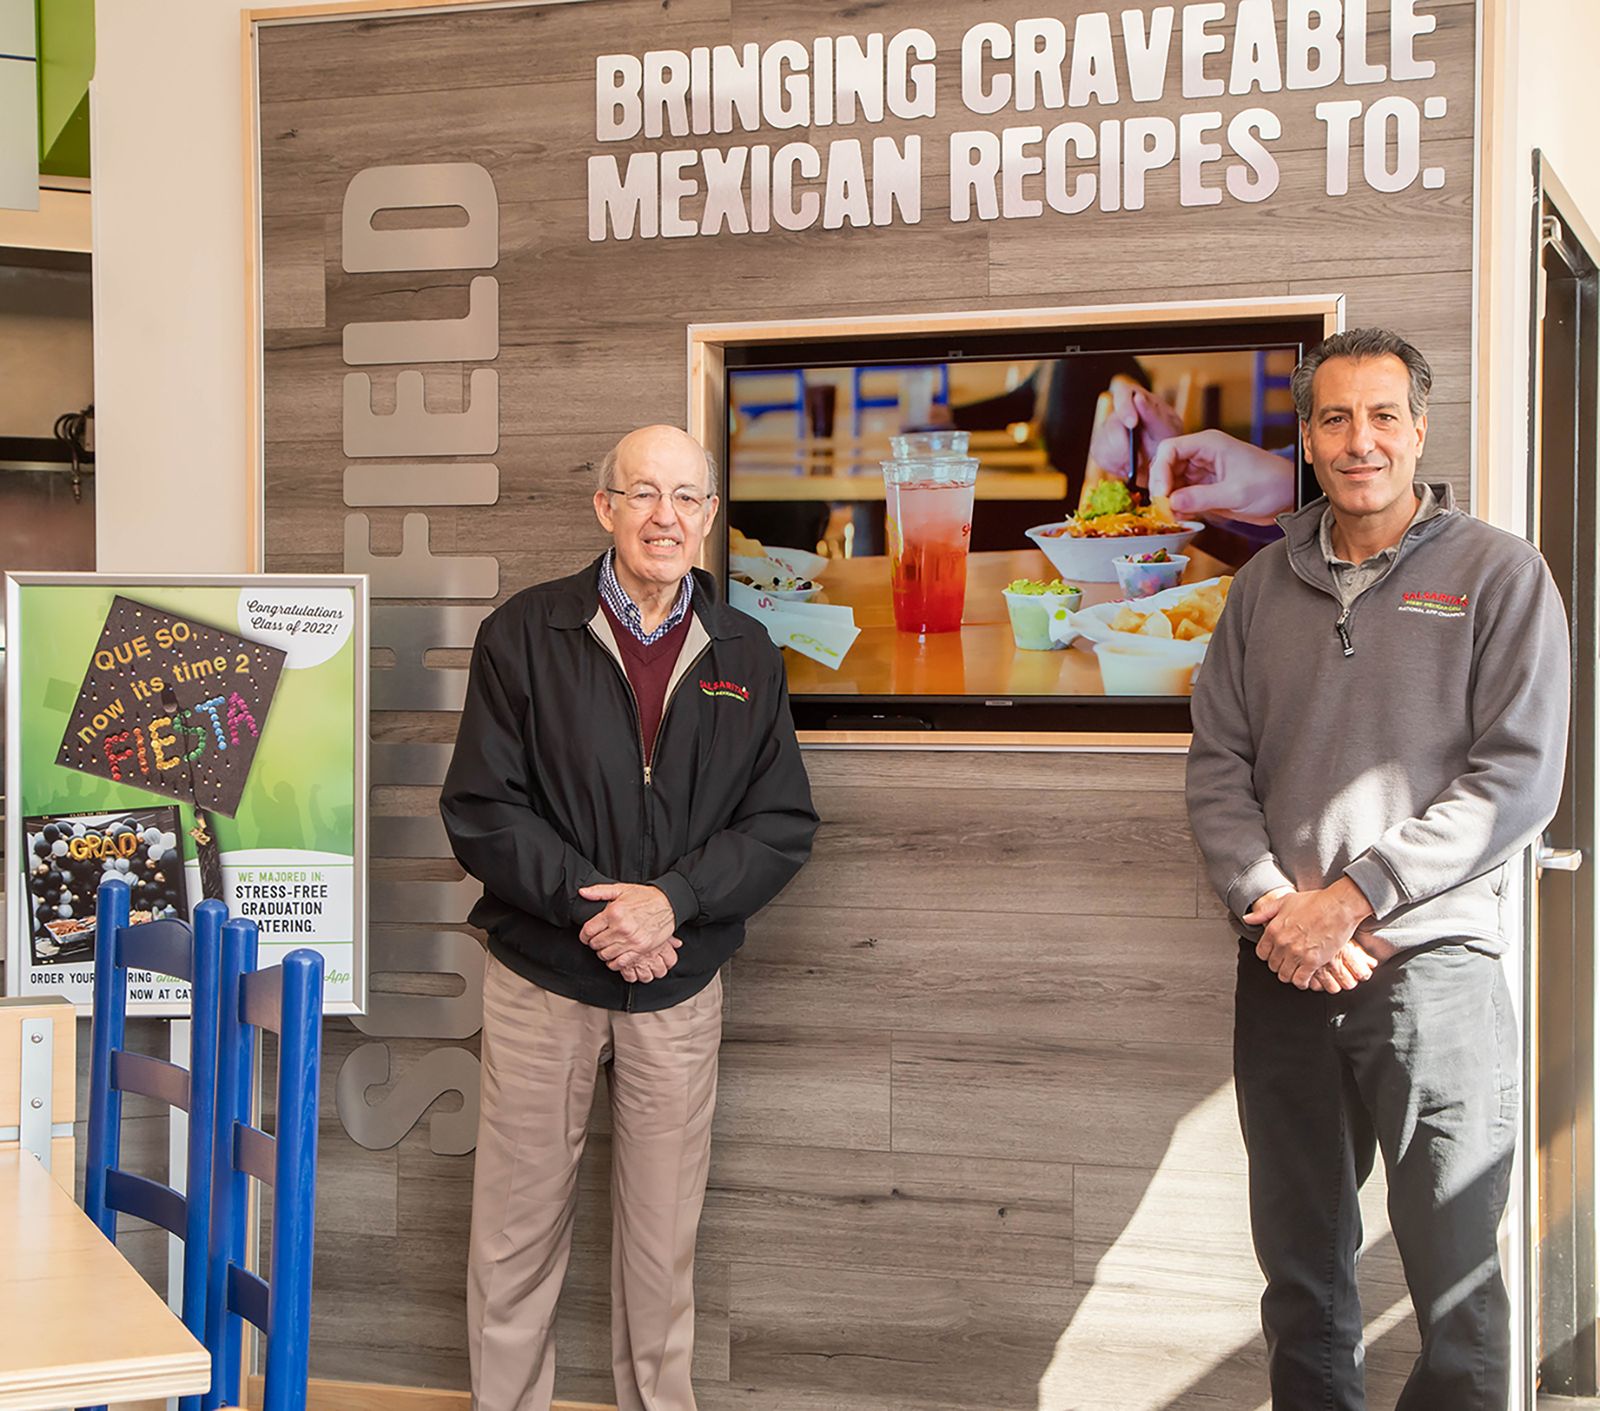 Whether It's a Recession, Pandemic, Labor Shortage or More Salsarita's Fresh Mexican Grill Star Multi-Unit Franchisee Steve Alie Has Overcome Every Obstacle on His Path